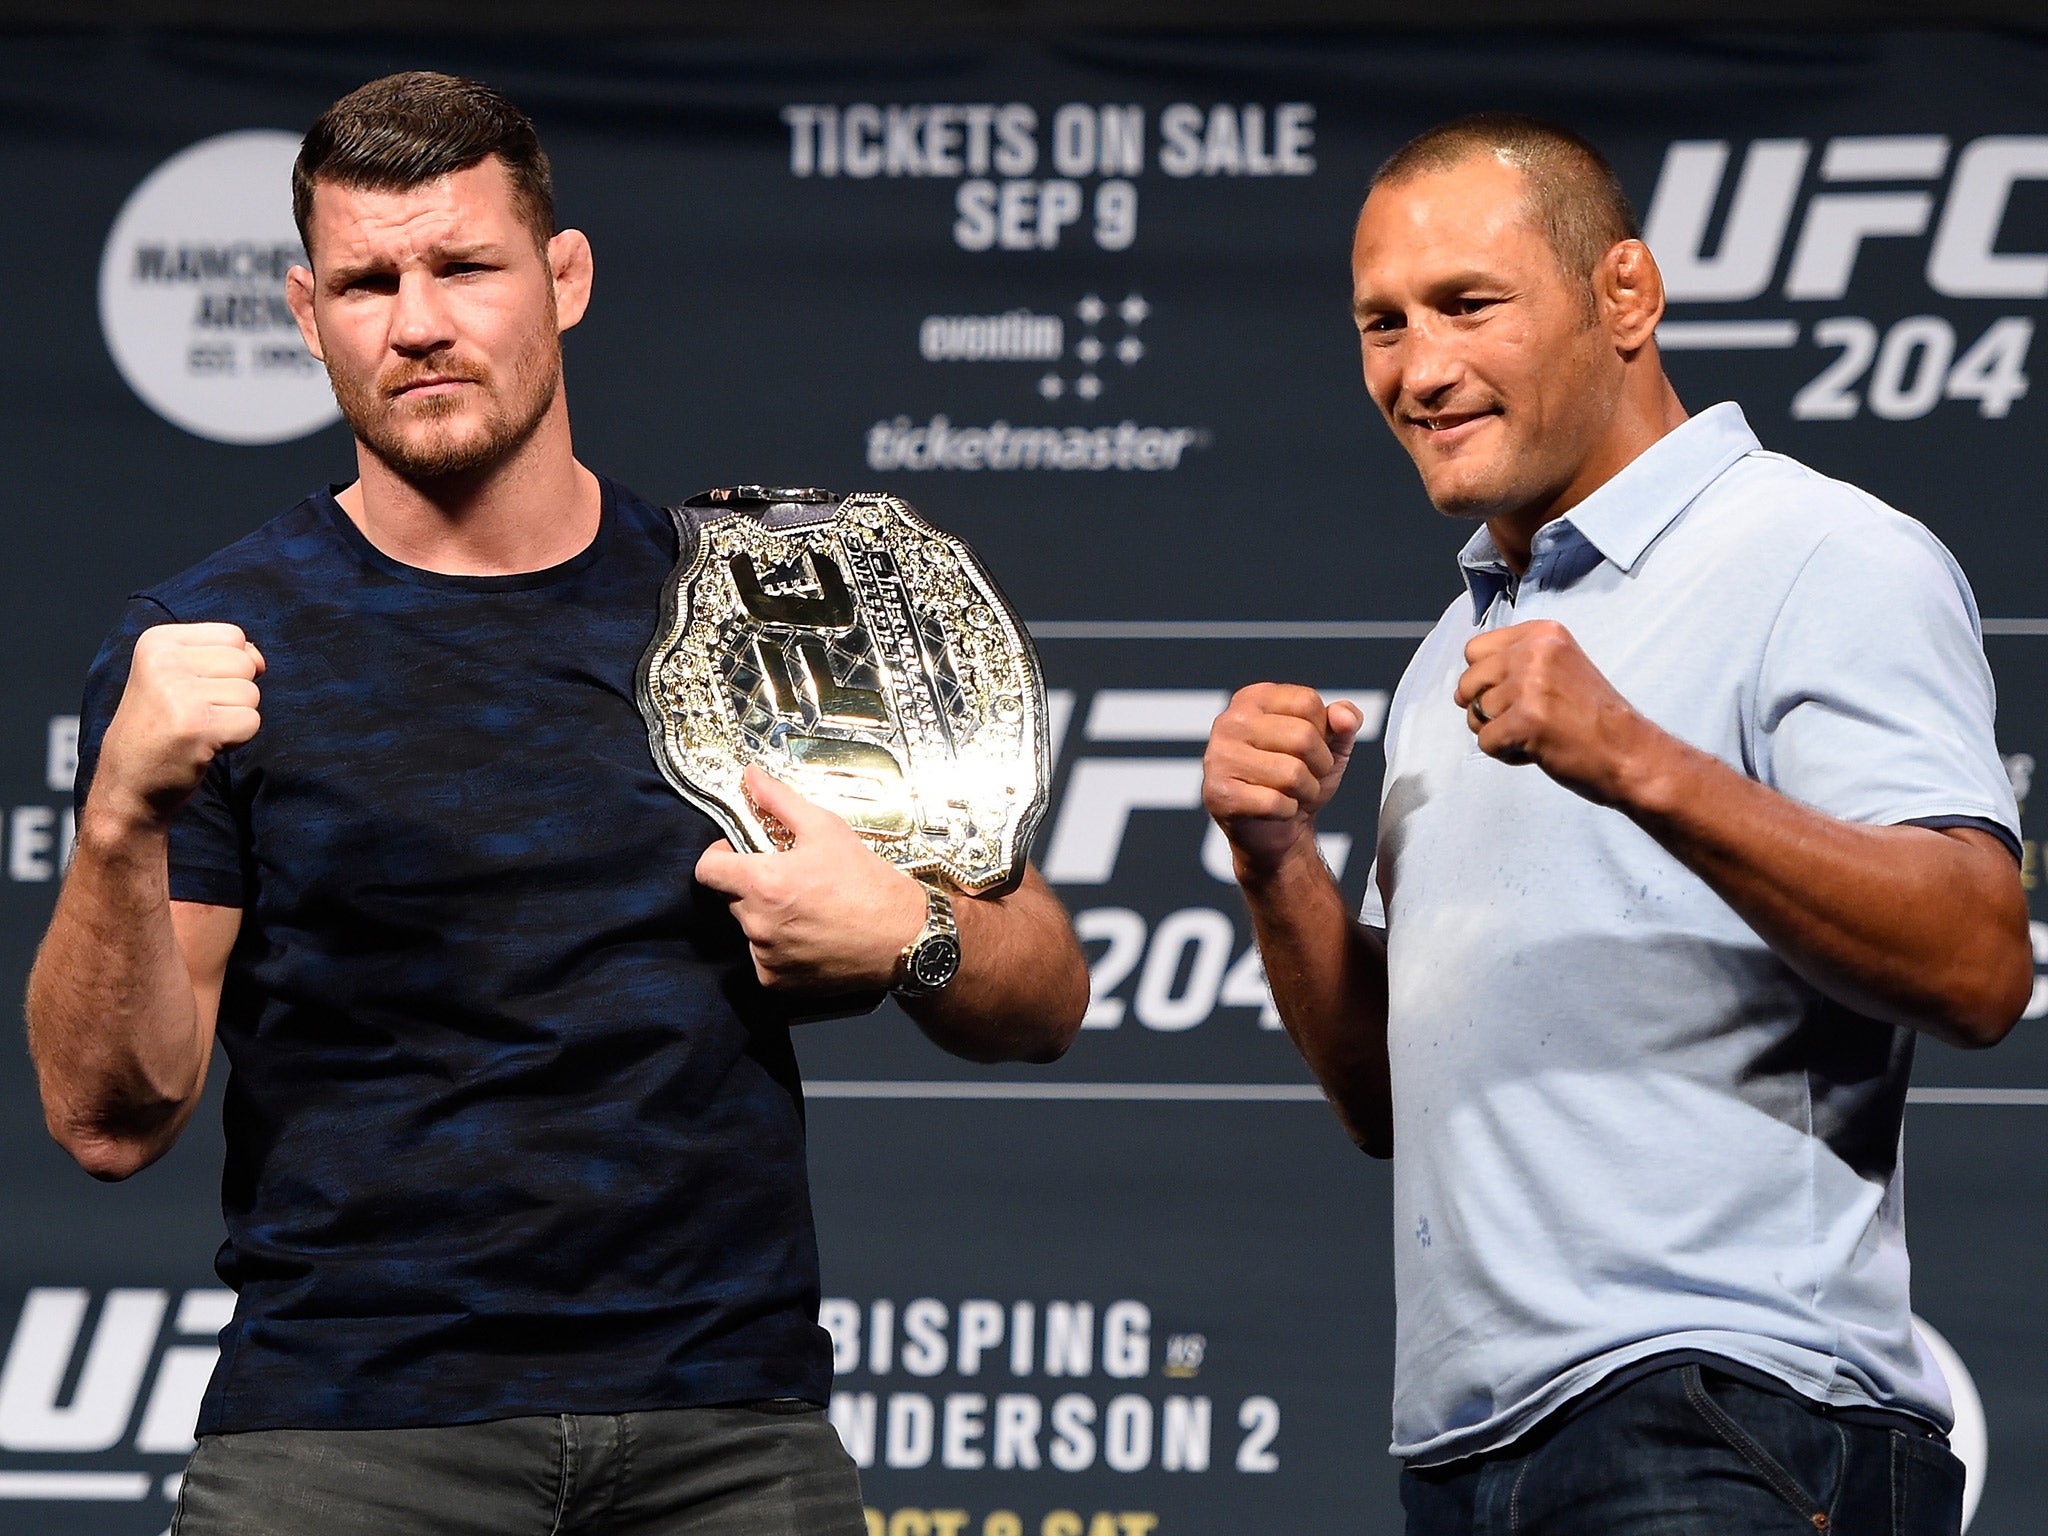 Michael Bisping defended his UFC middleweight championship against Dan Henderson